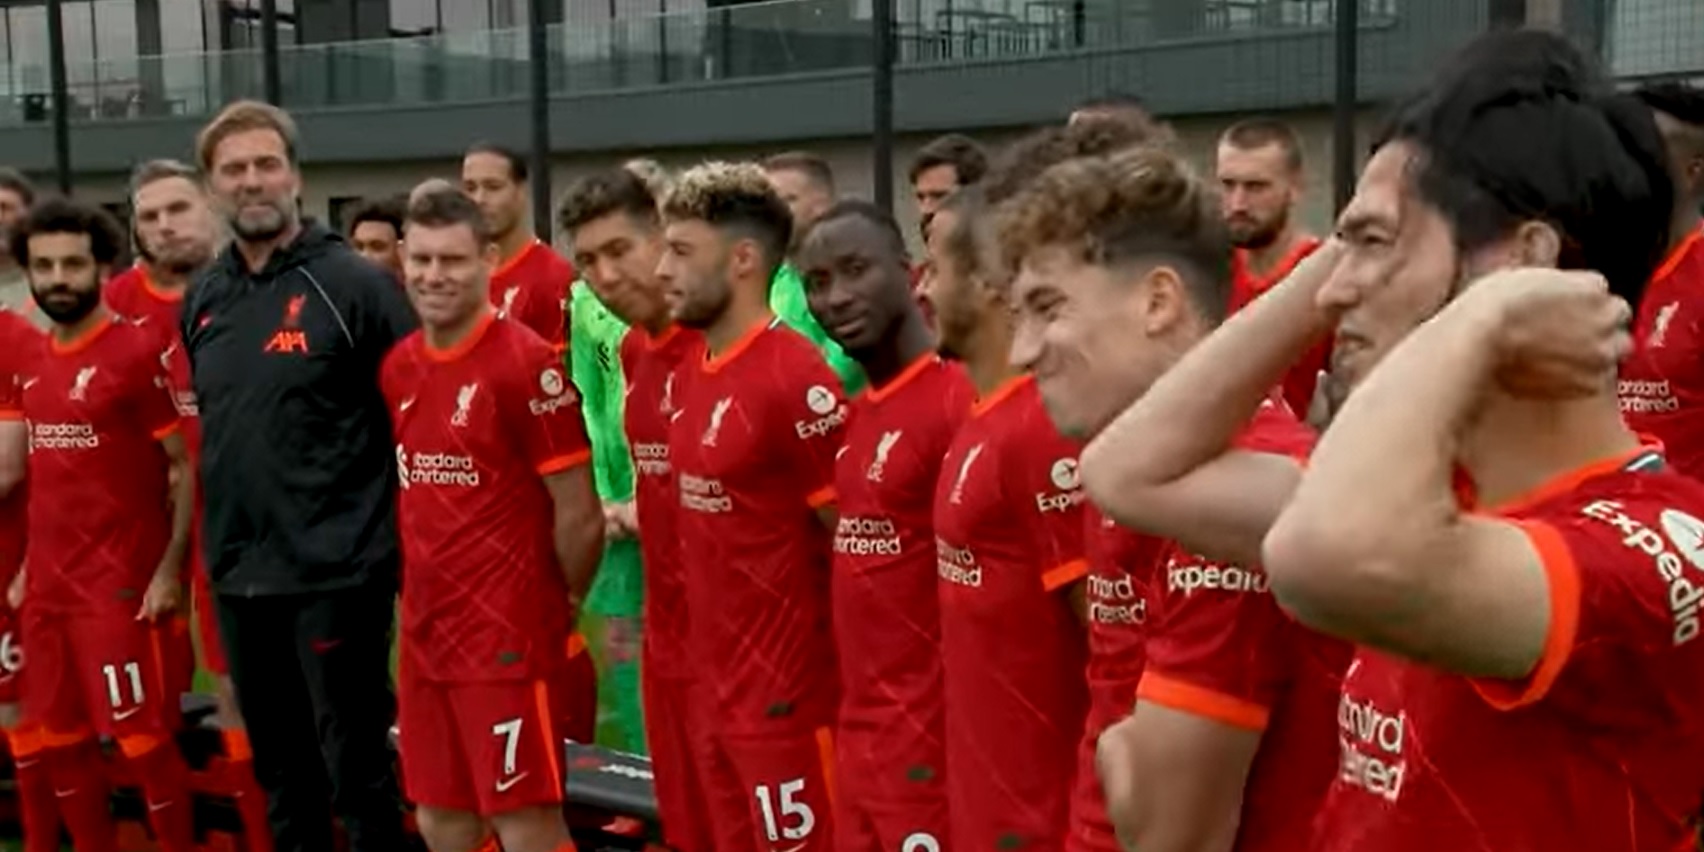 (Video) “Tell him it’s not that cold” – Klopp fires jibe at shivering Tsimikas during Liverpool photoshoot